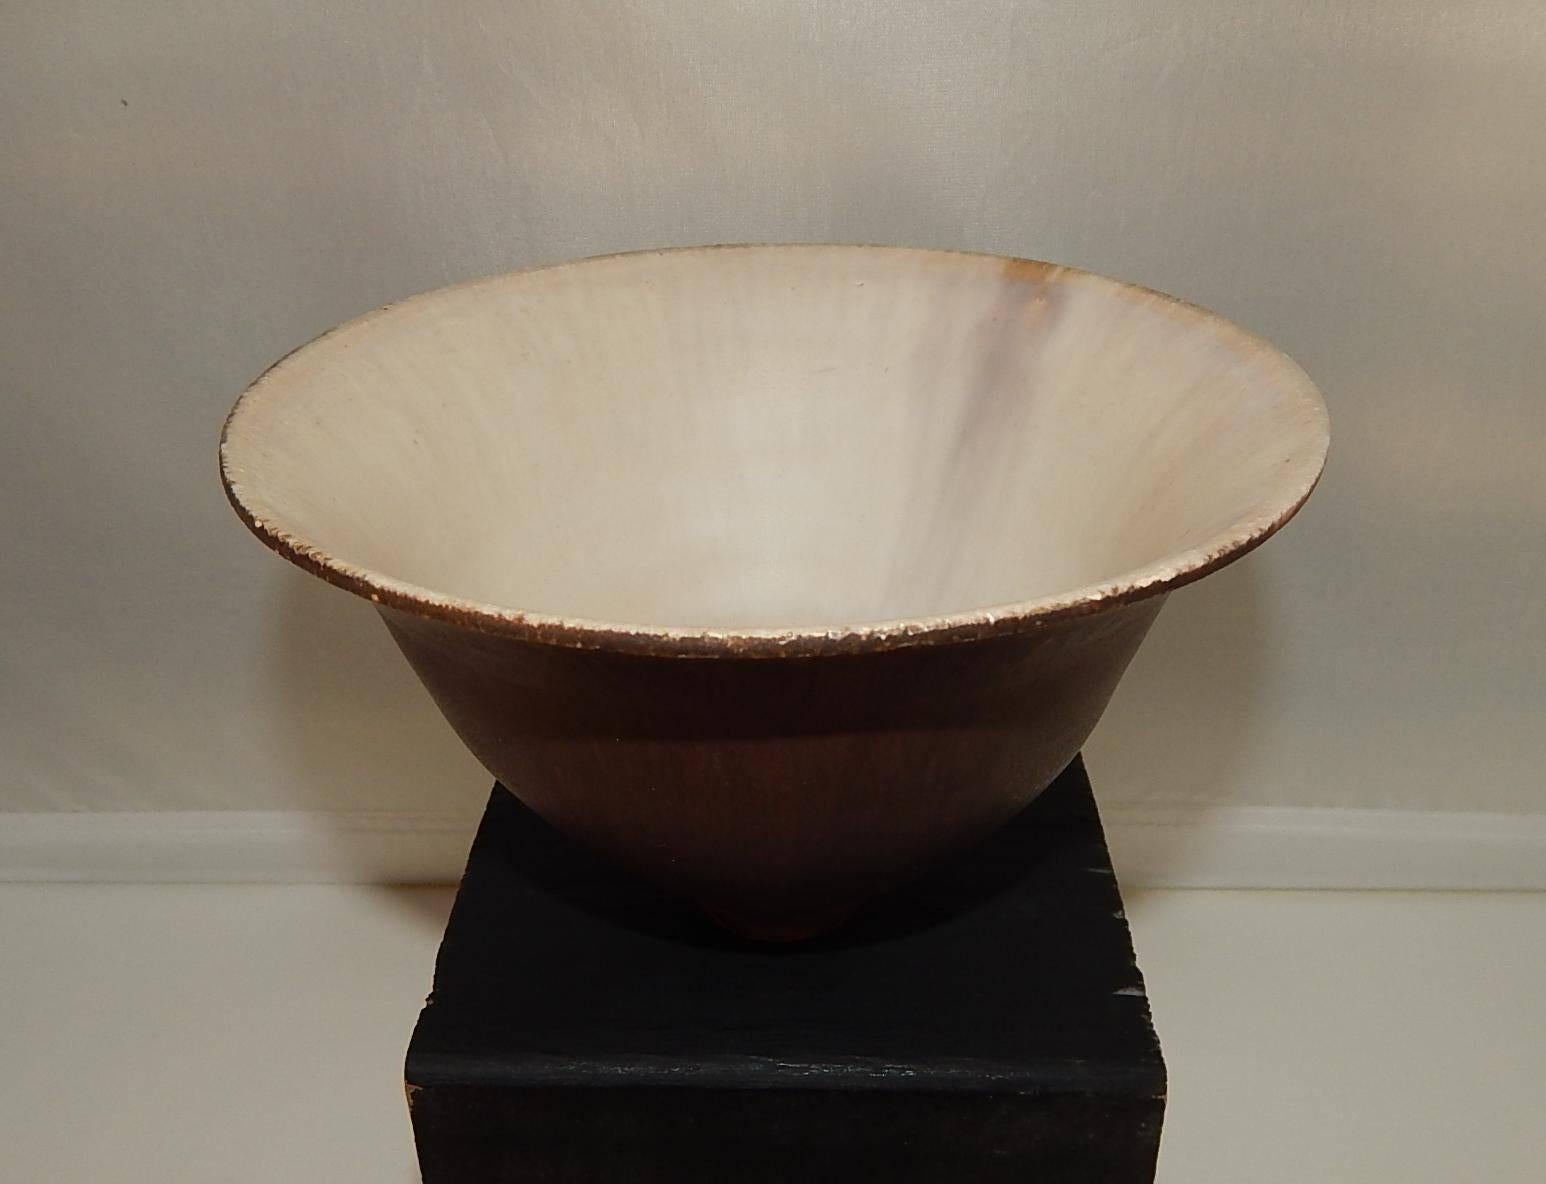 This gracefully flared ceramic bowl bears her traditional “feelie” soft glaze with large drips showing near the base.
Rich brown with cream interior. Measure: 3.5